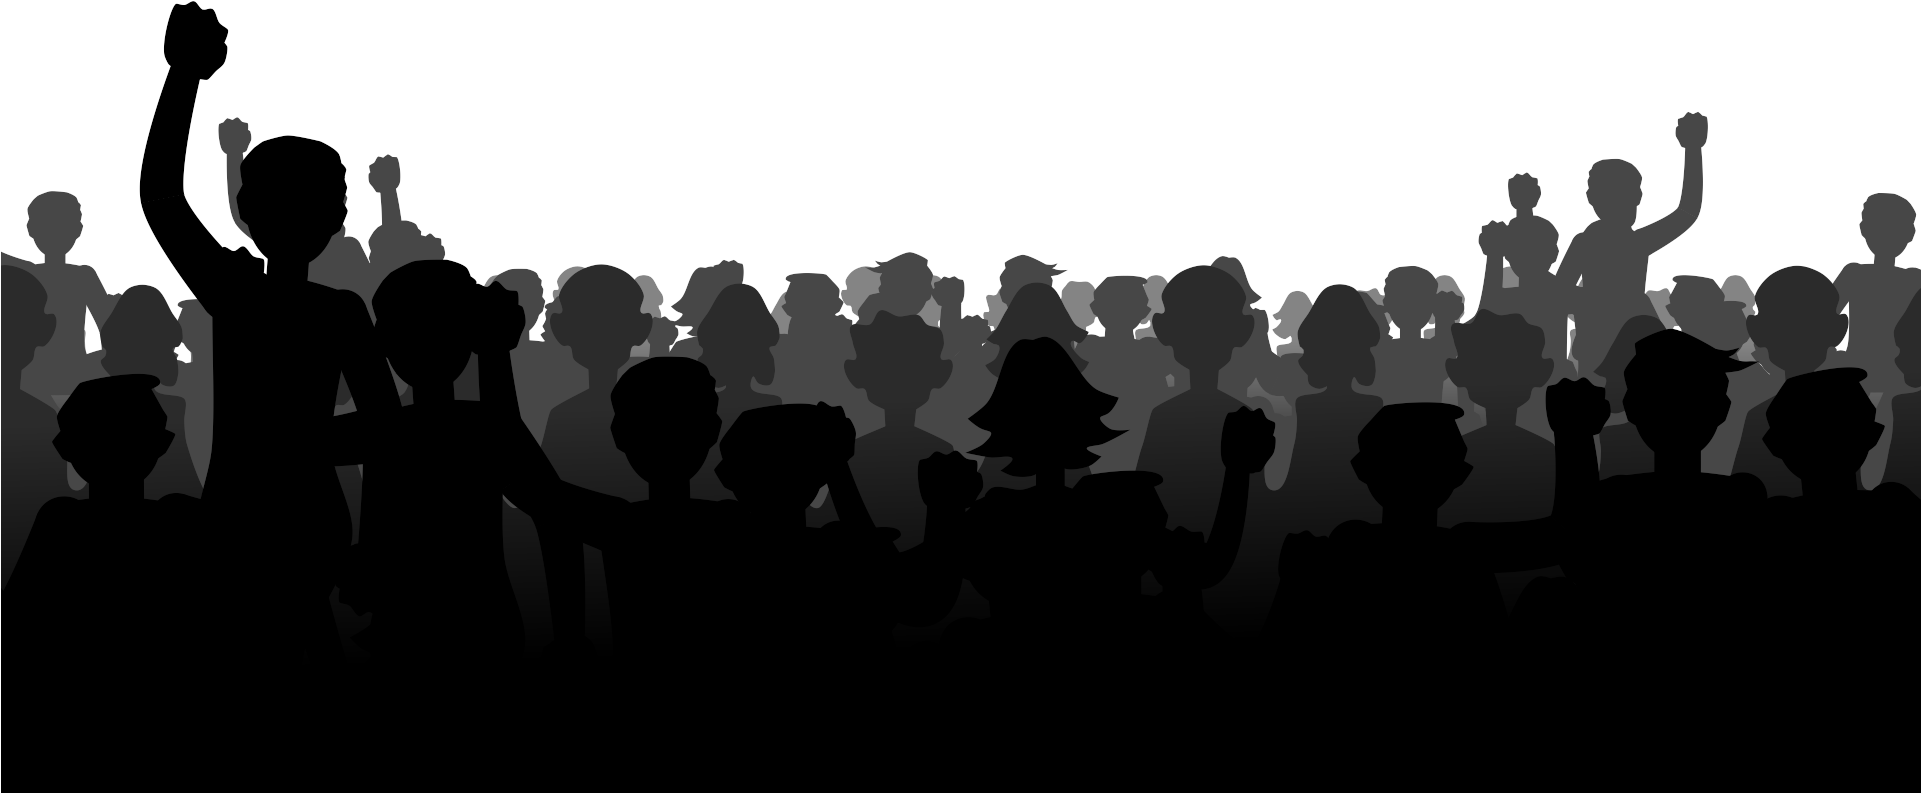 Download PNG image - Crowd Silhouette PNG Image 